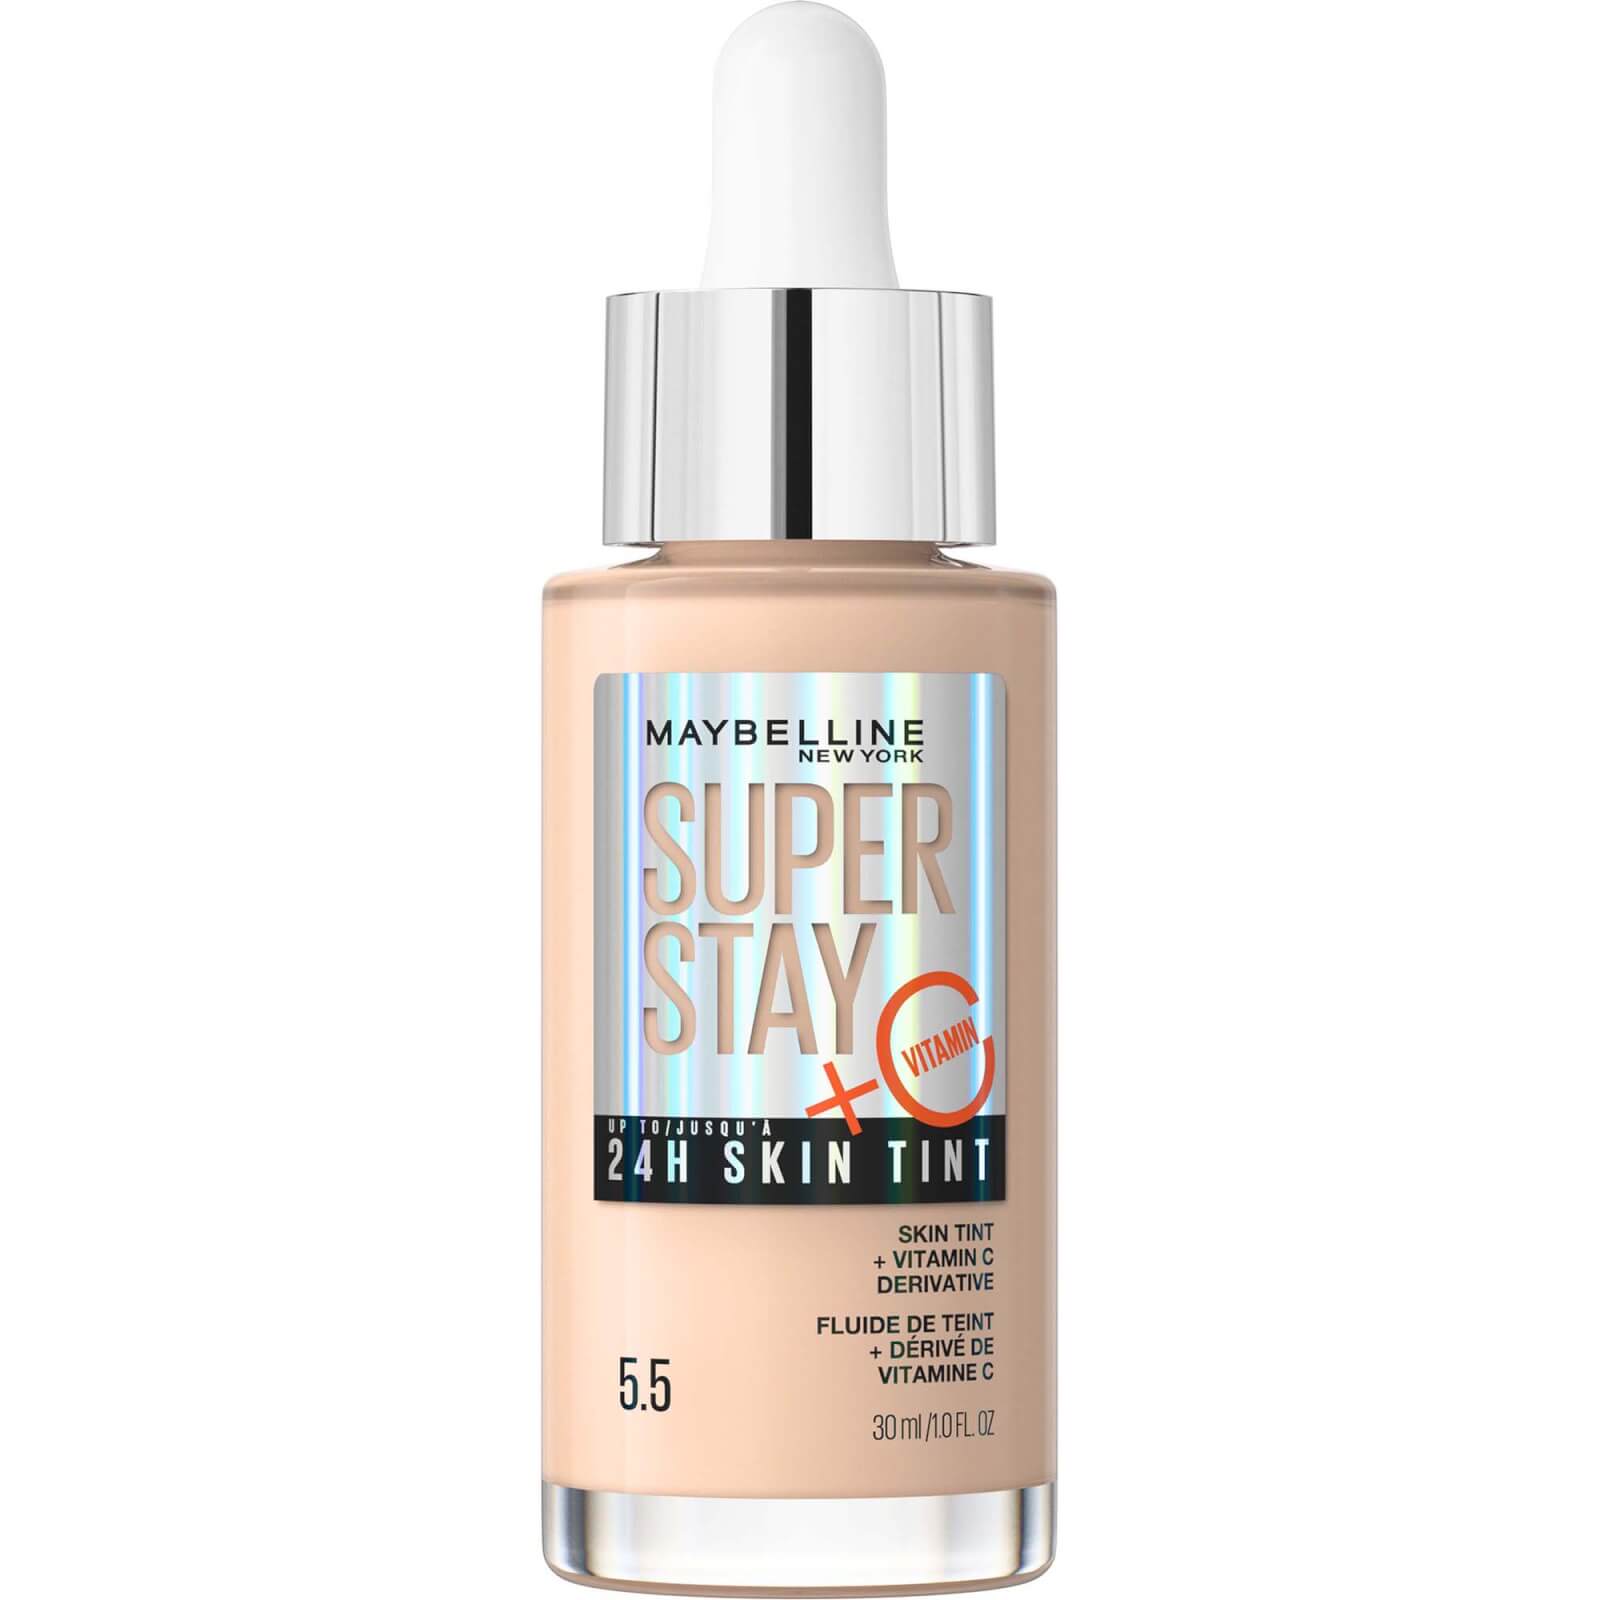 maybelline super stay up to 24h skin tint foundation + vitamin c 30ml (various shades) - 5.5